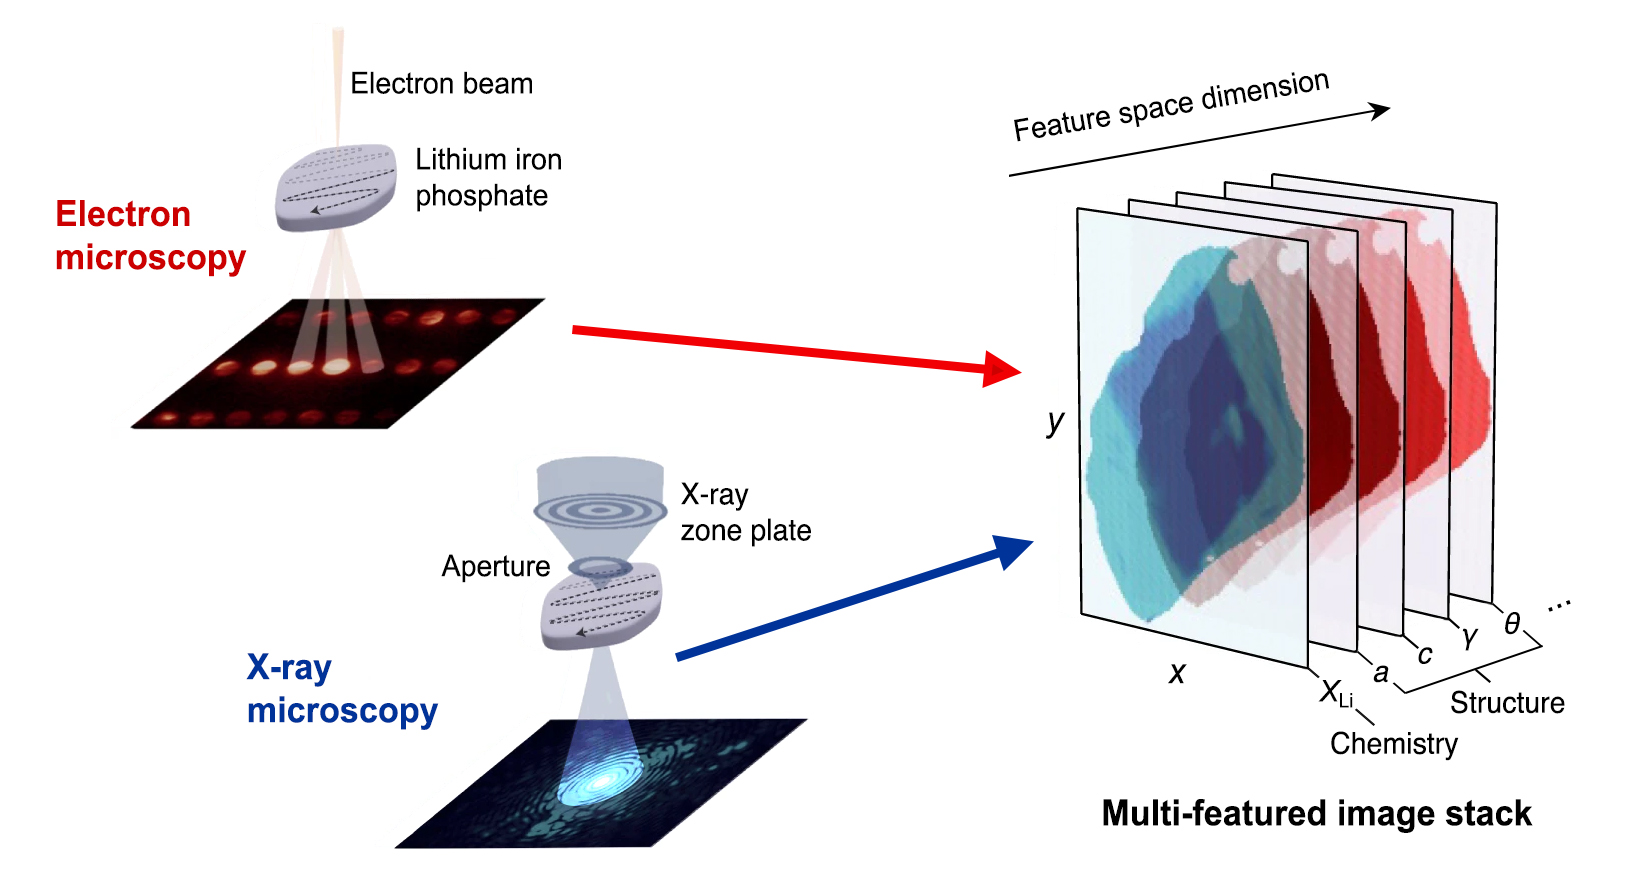 Experiment setups for electron and x-ray microscopies (left) and resulting image stack (right).